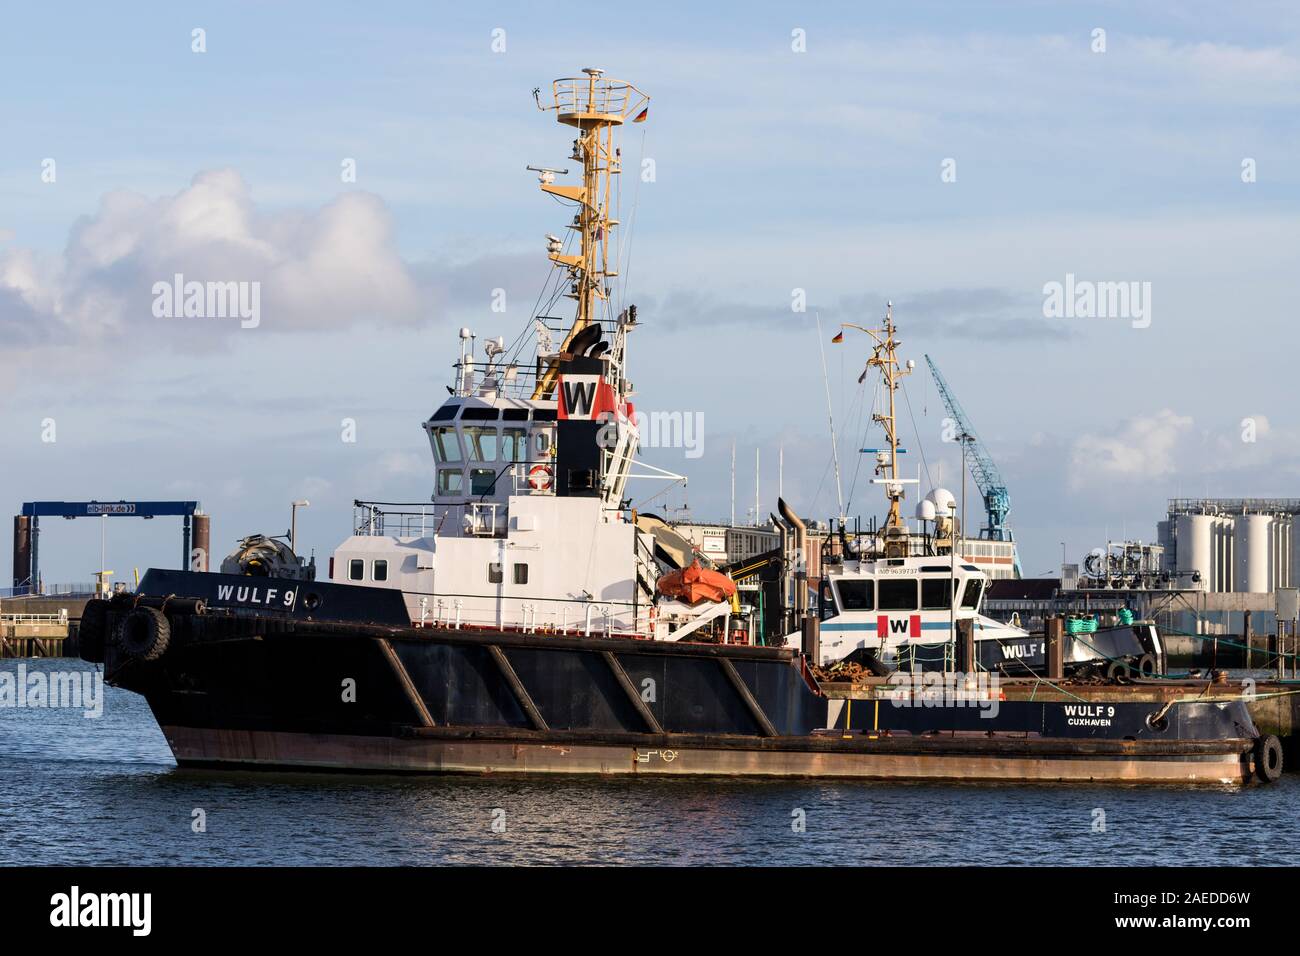 tugboat WULF 9 in the port of Cuxhaven Stock Photo